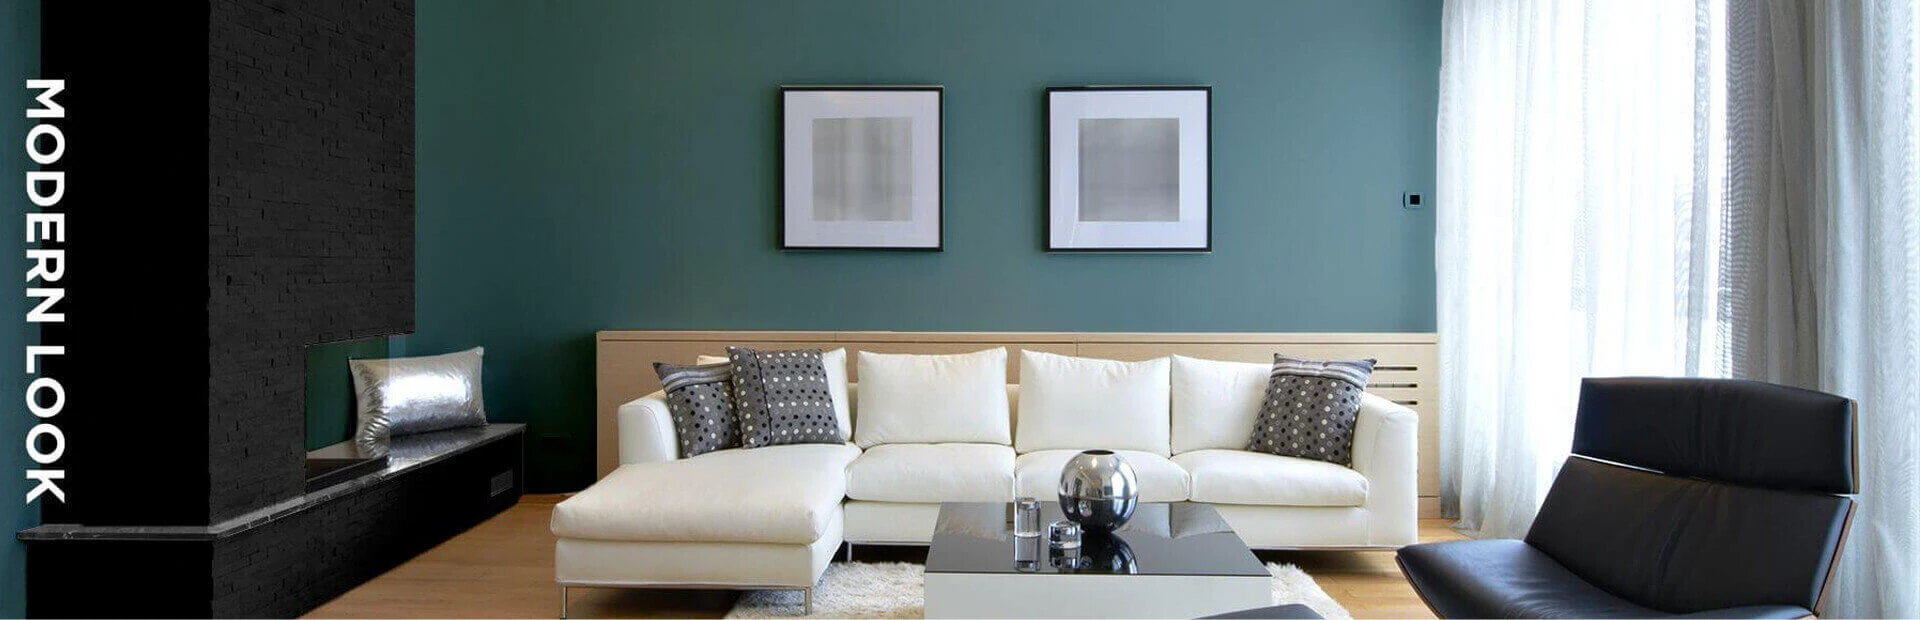 living room colour palette with green, cream and black.